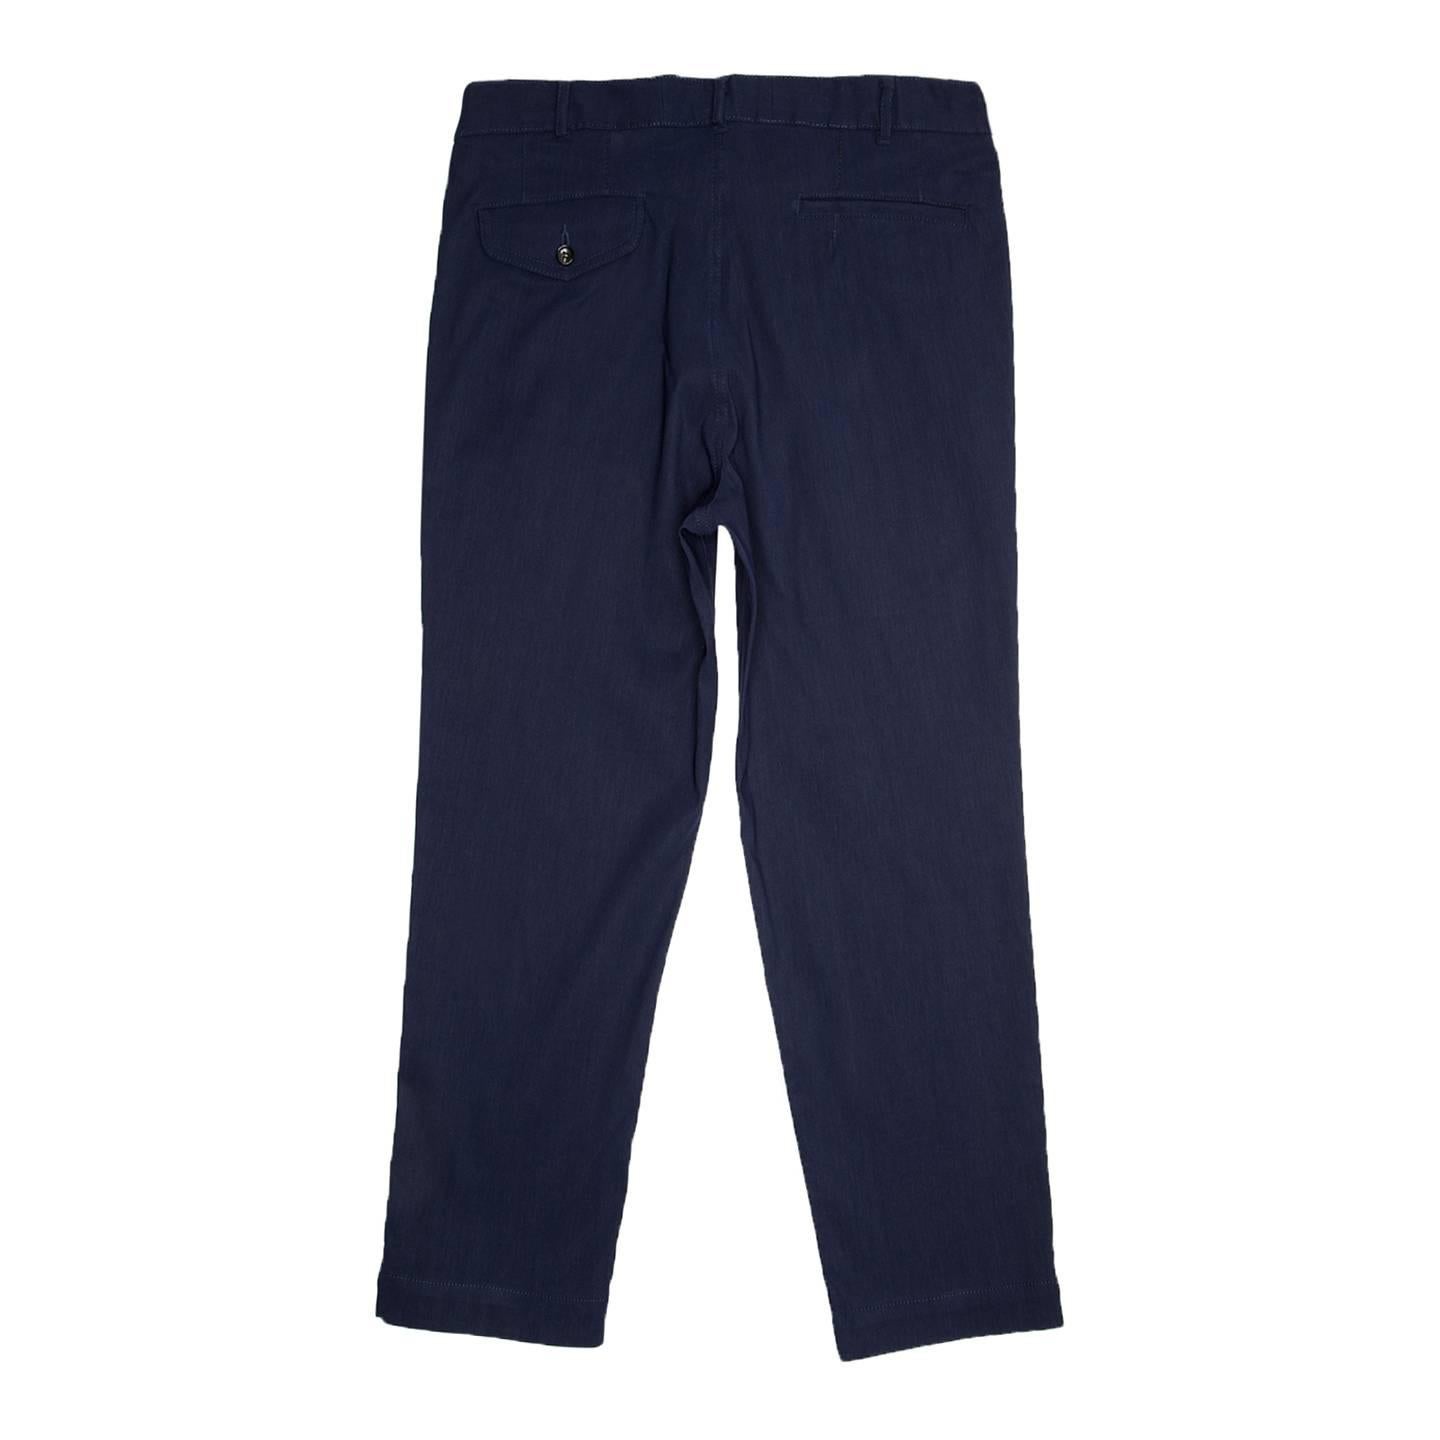 Comme des Garçons Navy Stretch Capri Pants In New Condition For Sale In Brooklyn, NY